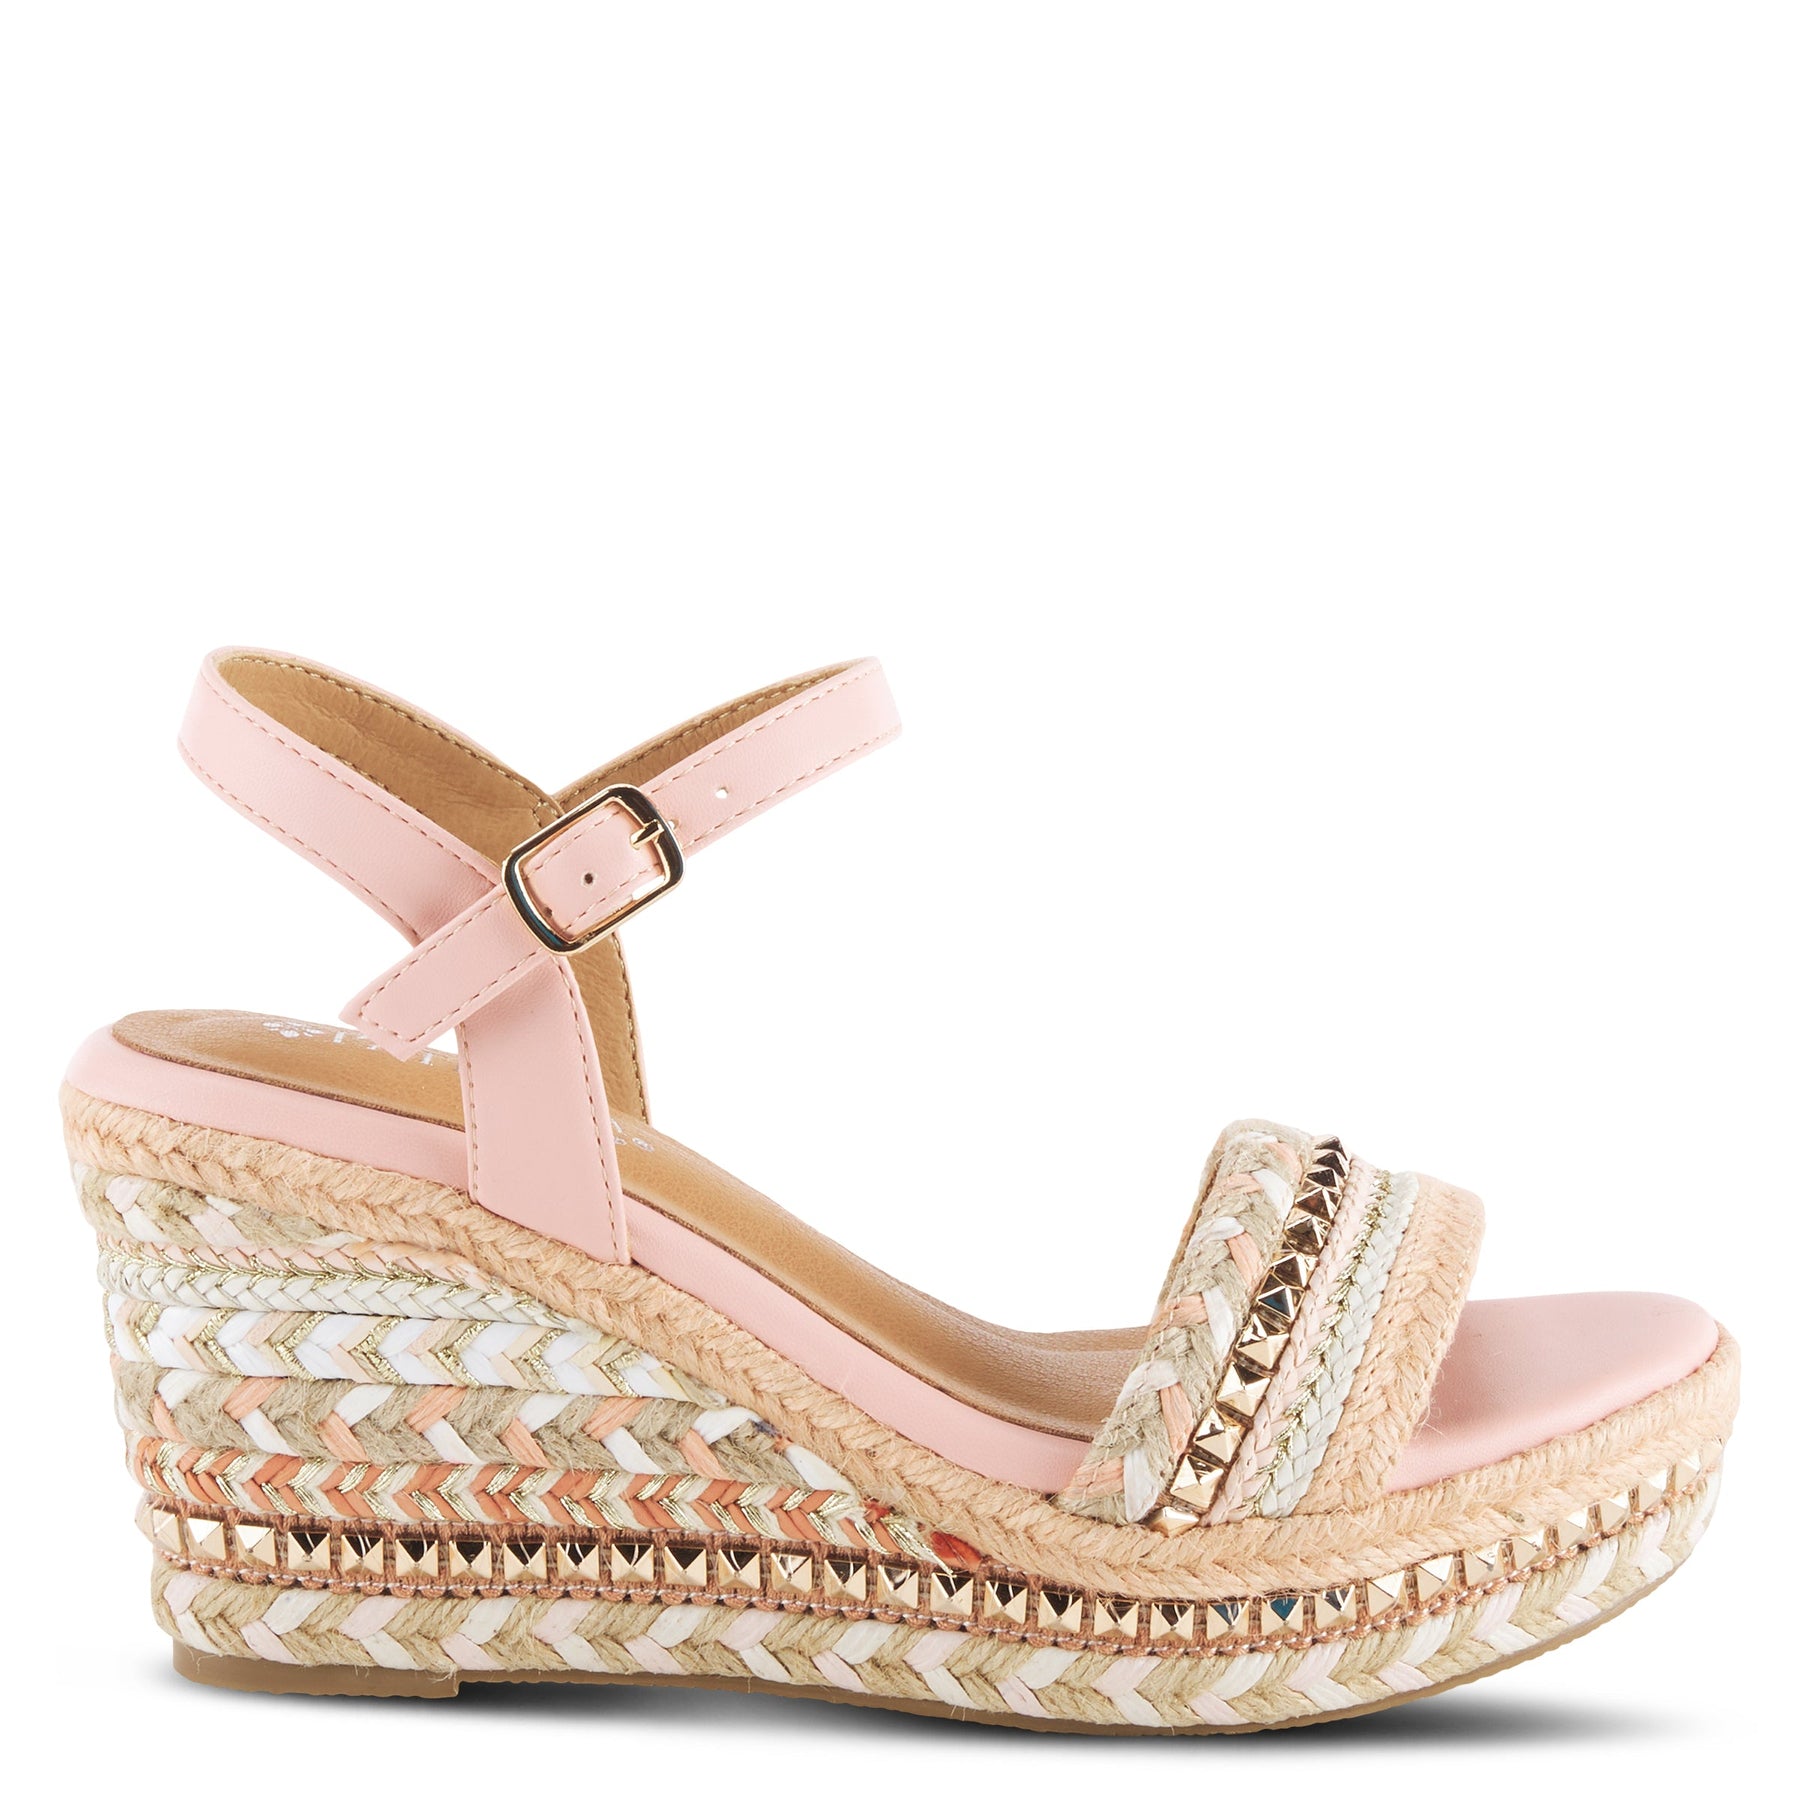 TISCH SANDAL by Patrizia – Spring Step Shoes